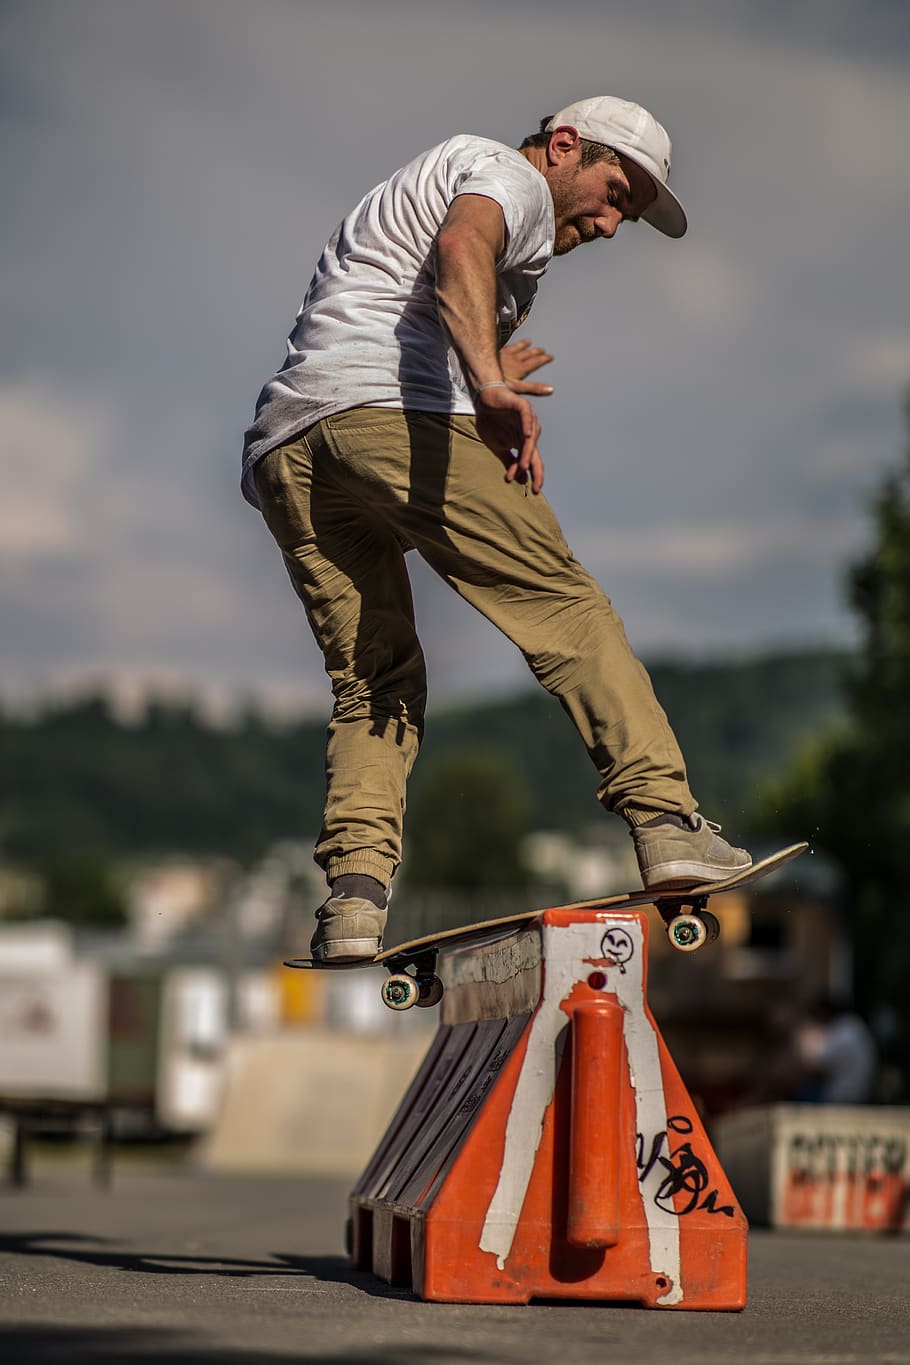 Person Doing Trick on Skateboard, action, balance, blurred background